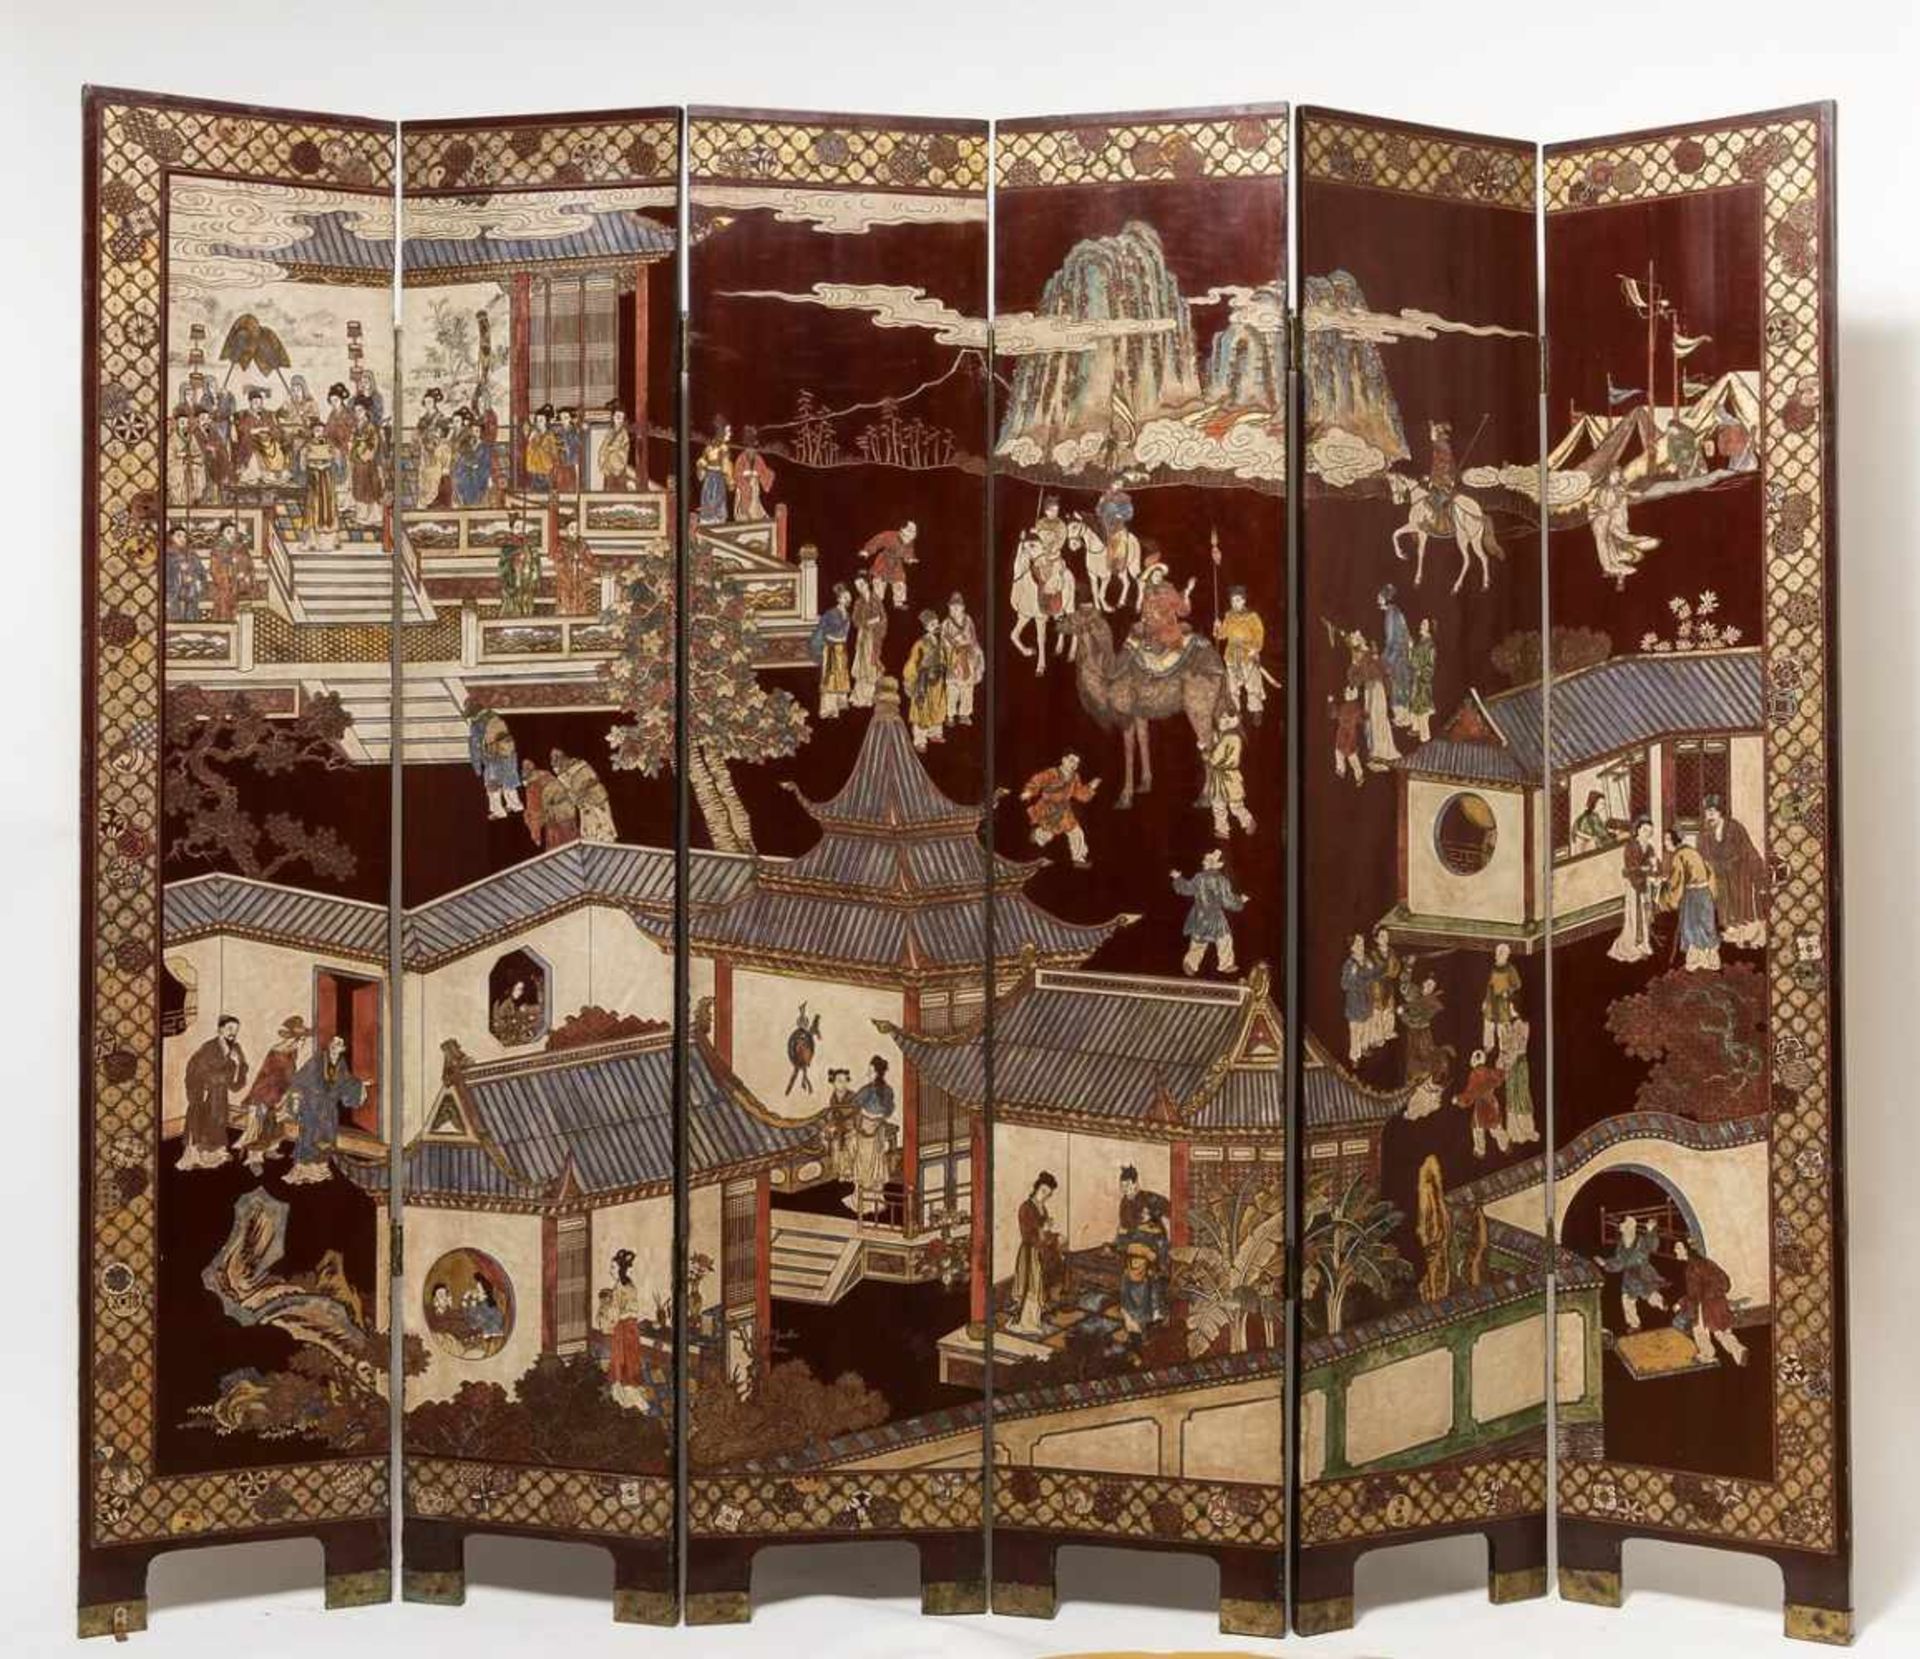 LARGE SIX-PART KOROMANDEL SCREEN DEPICTING AN IMPERIAL SCENE Wood, lacquer techniques. China, - Image 5 of 12